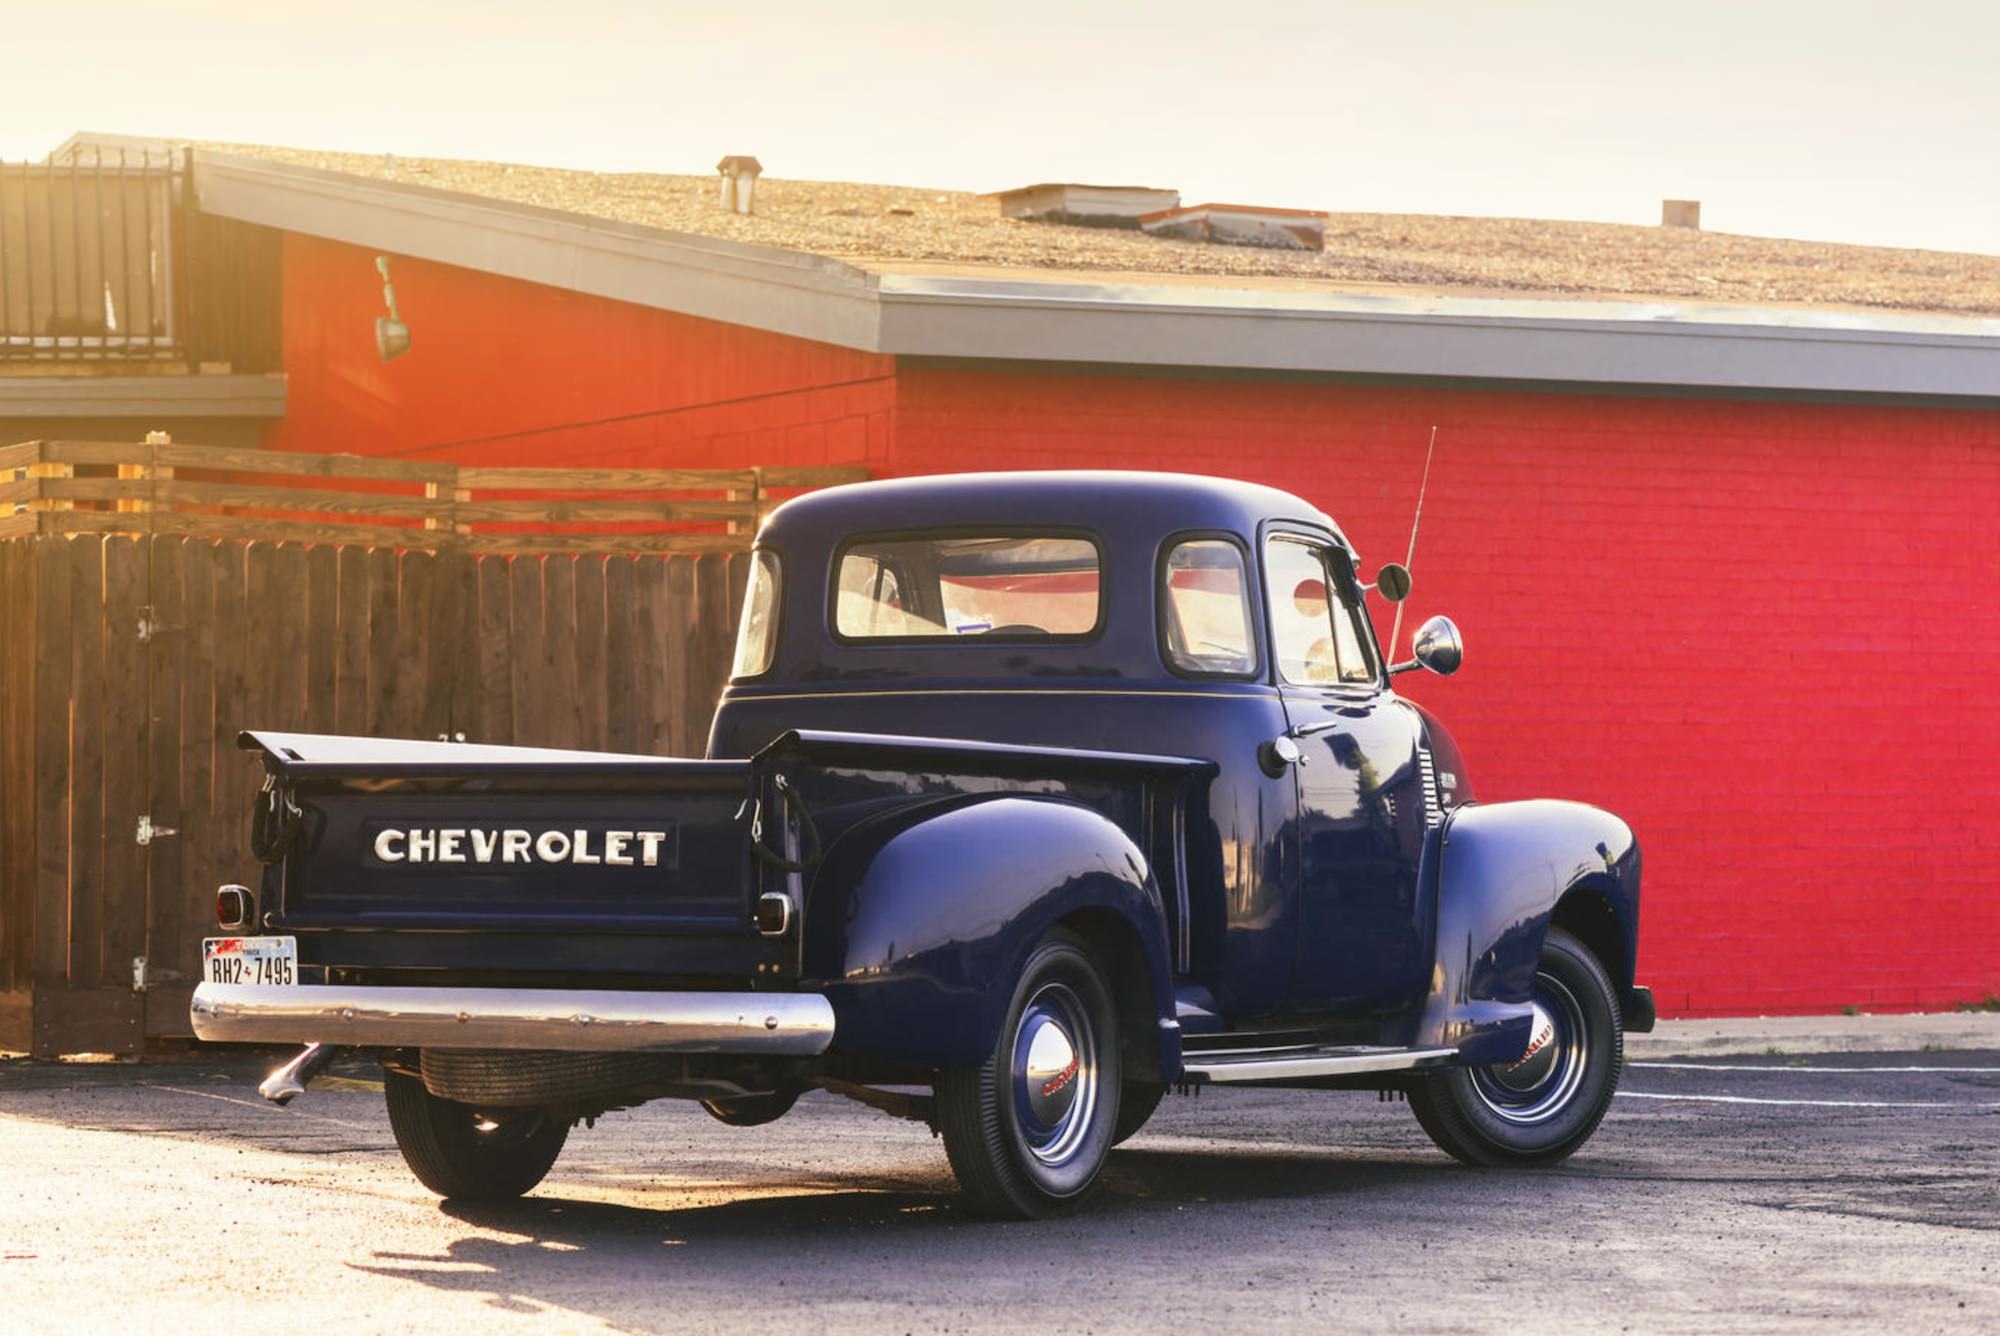 HQ Chevrolet 3100 Wallpapers | File 225.2Kb